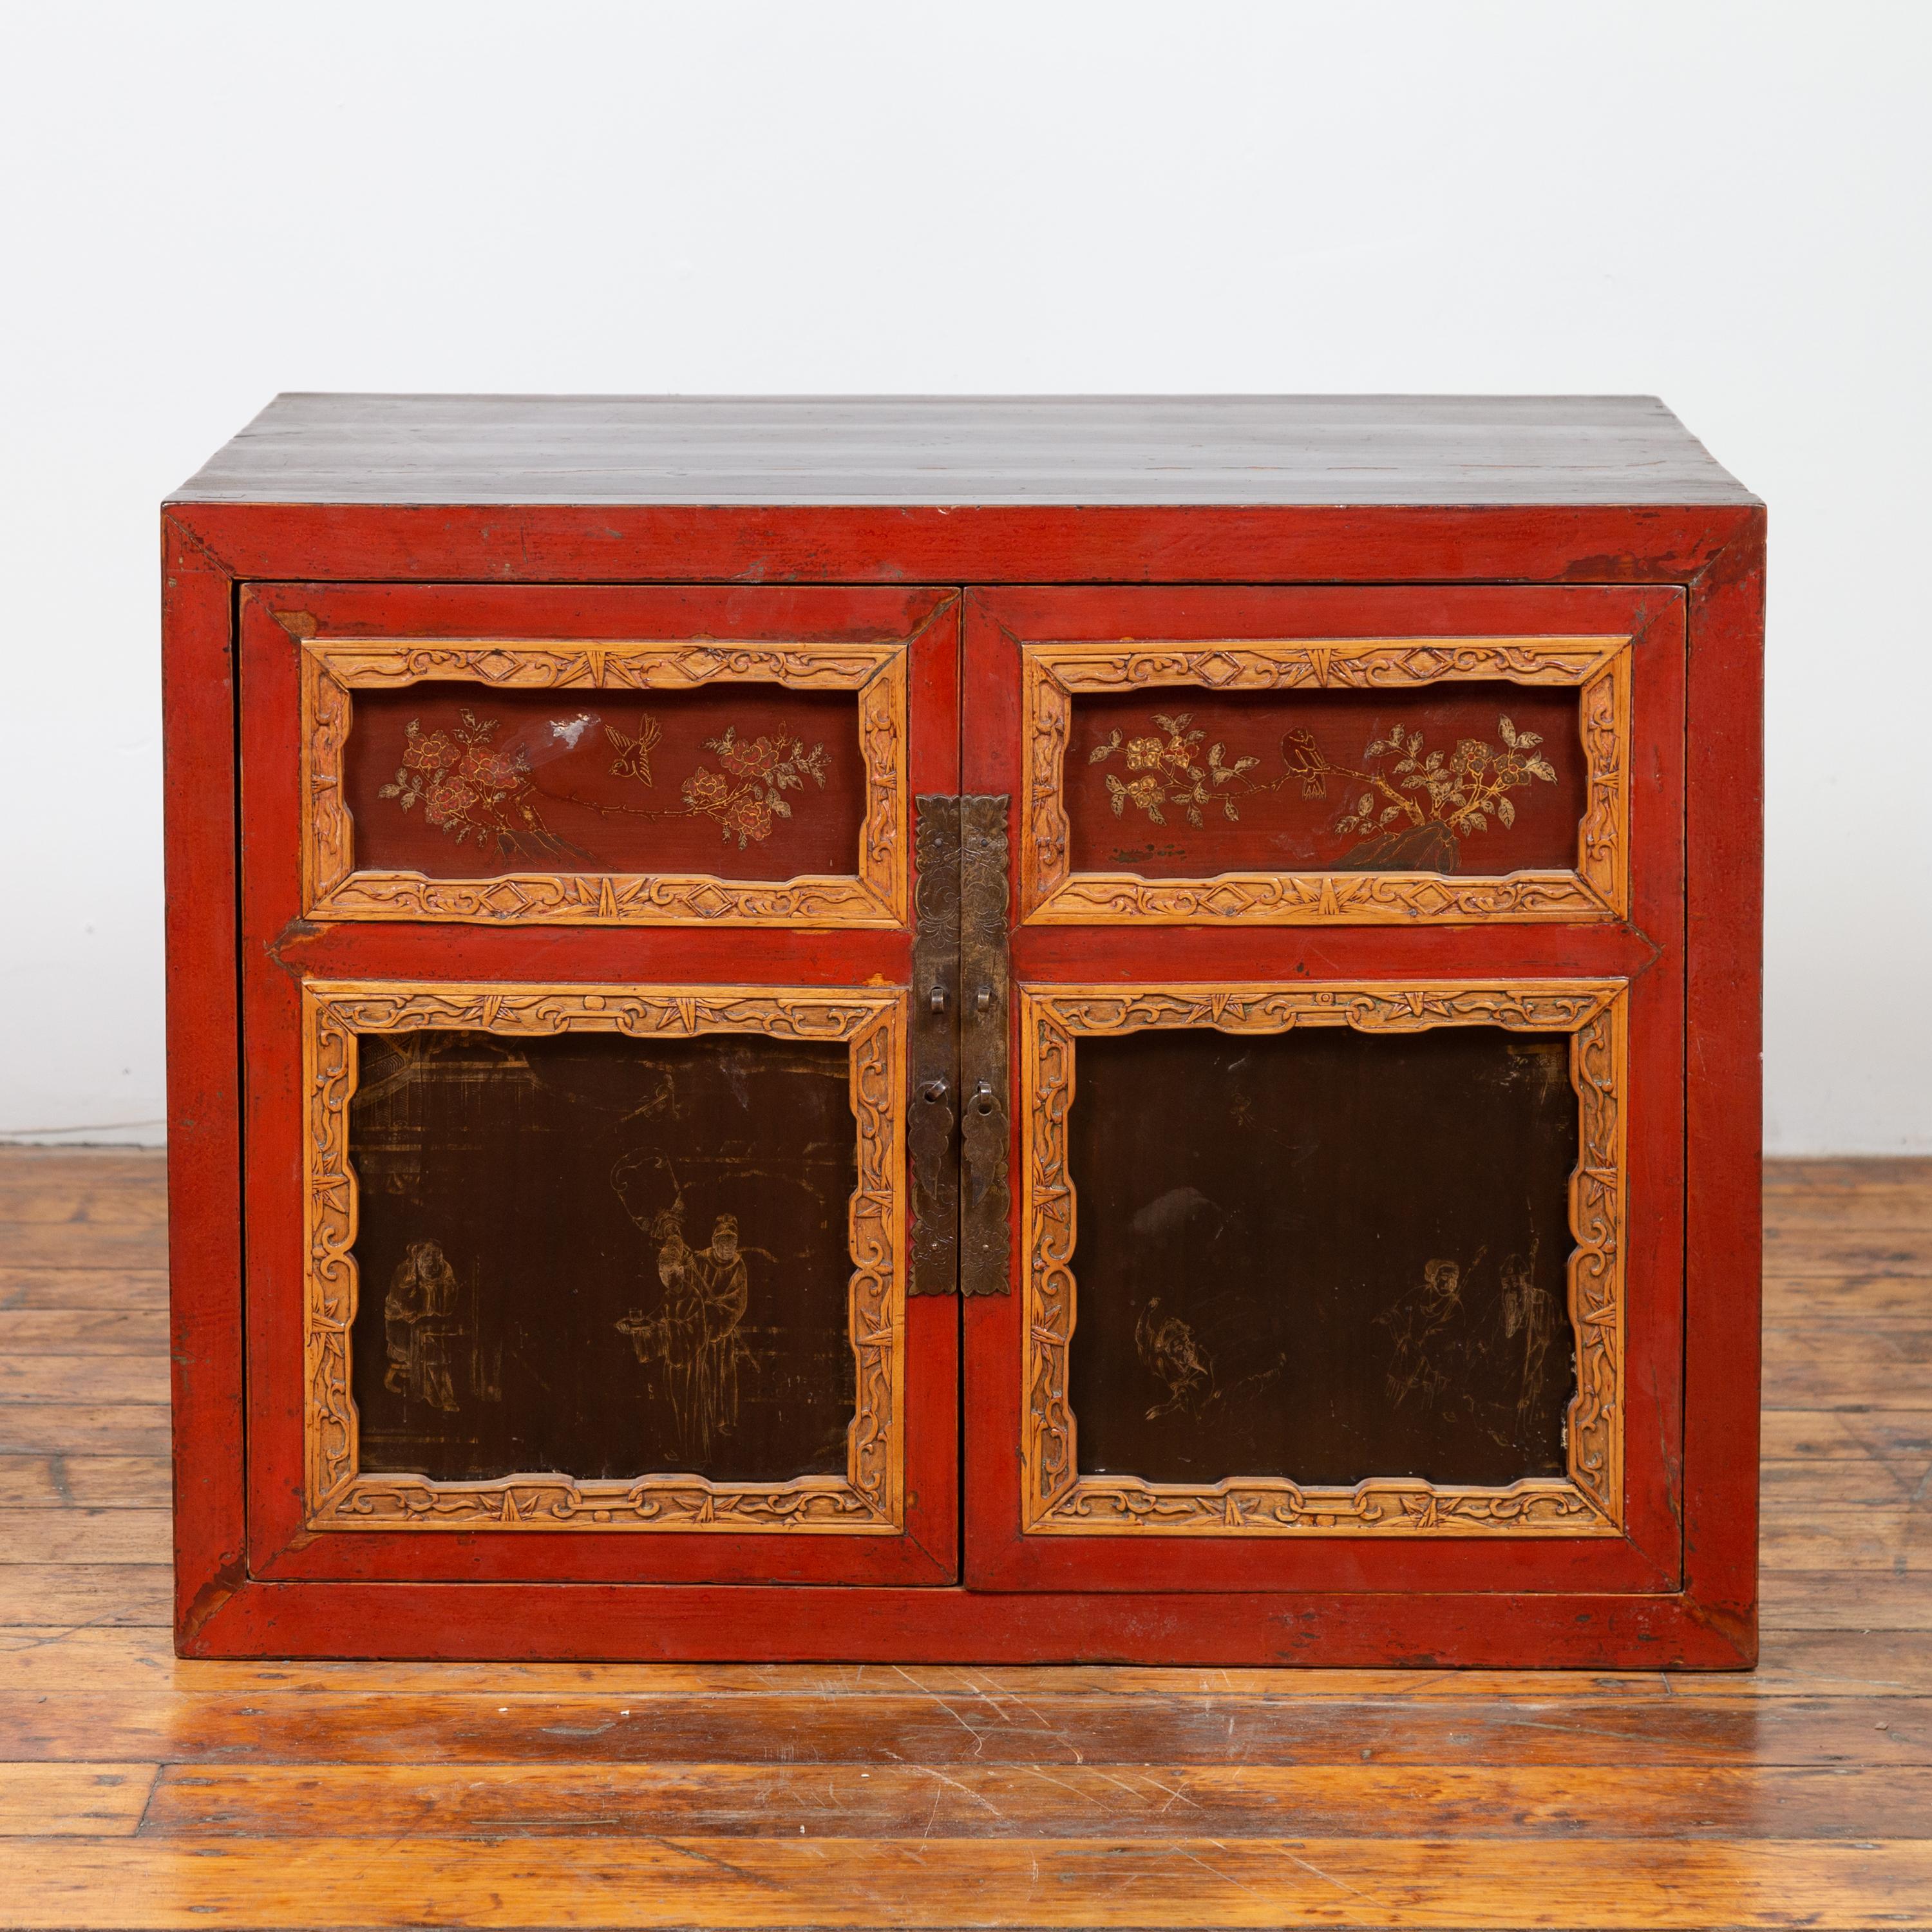 A Chinese small vintage red lacquered cabinet from the early 20th century, with golden tones and hand painted details. Born in China during the midcentury period, this small cabinet charms us with its red lacquered finish, accented with carved and